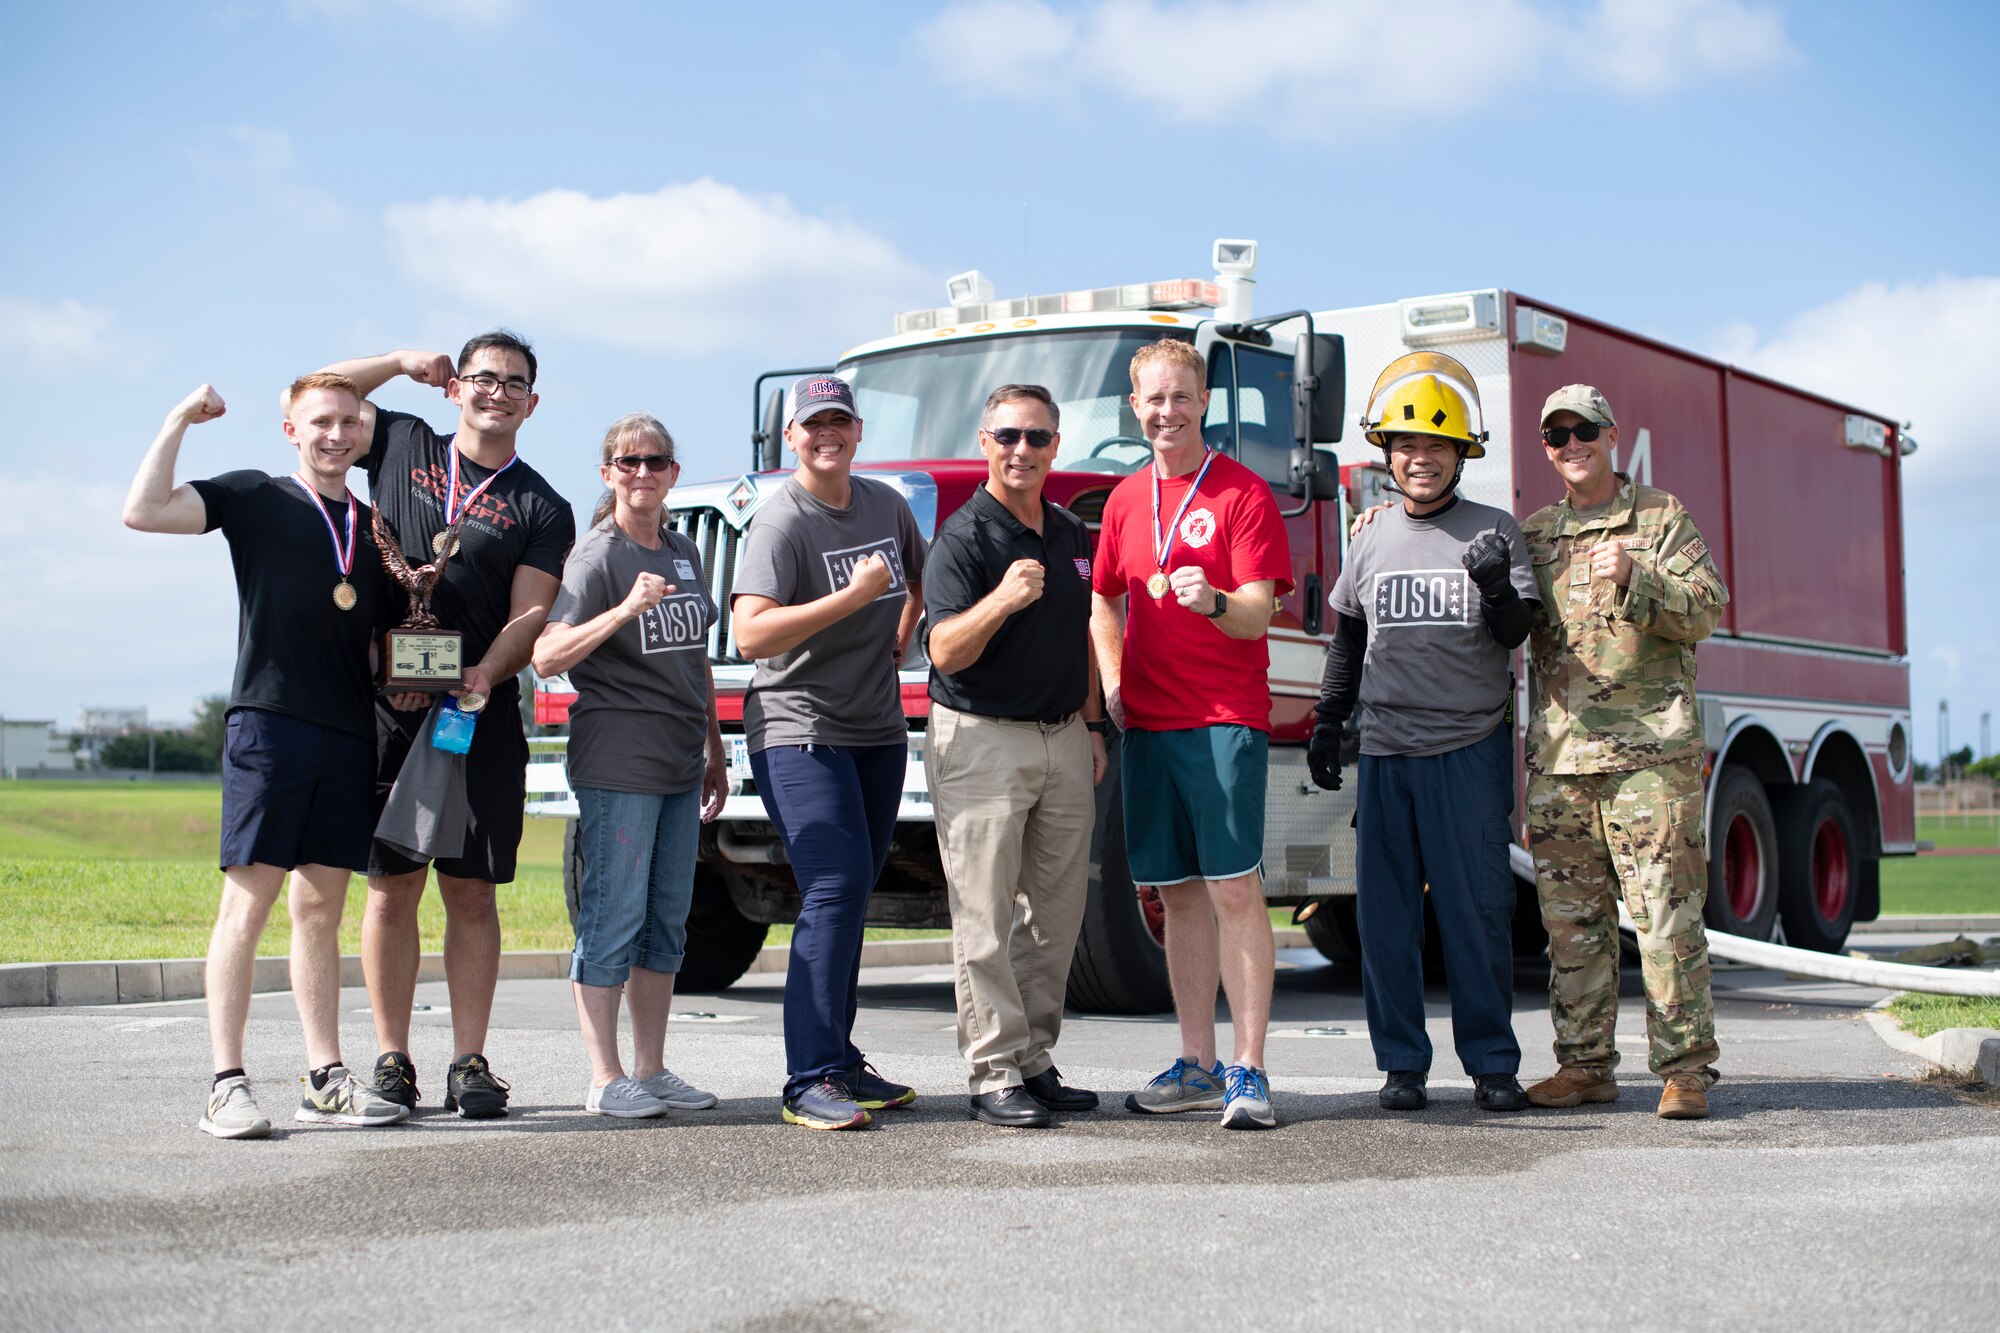 Airmen from the fire muster challenge winning team pose for a photo with members of the USO staff at Kadena Air Base, Japan, Oct. 6, 2022. The winning team finished the challenge with a top time of 4 minutes and 2 seconds, beating their closest competition by more than thirty seconds. (U.S. Air Force photo by Senior Airman Jessi Roth)